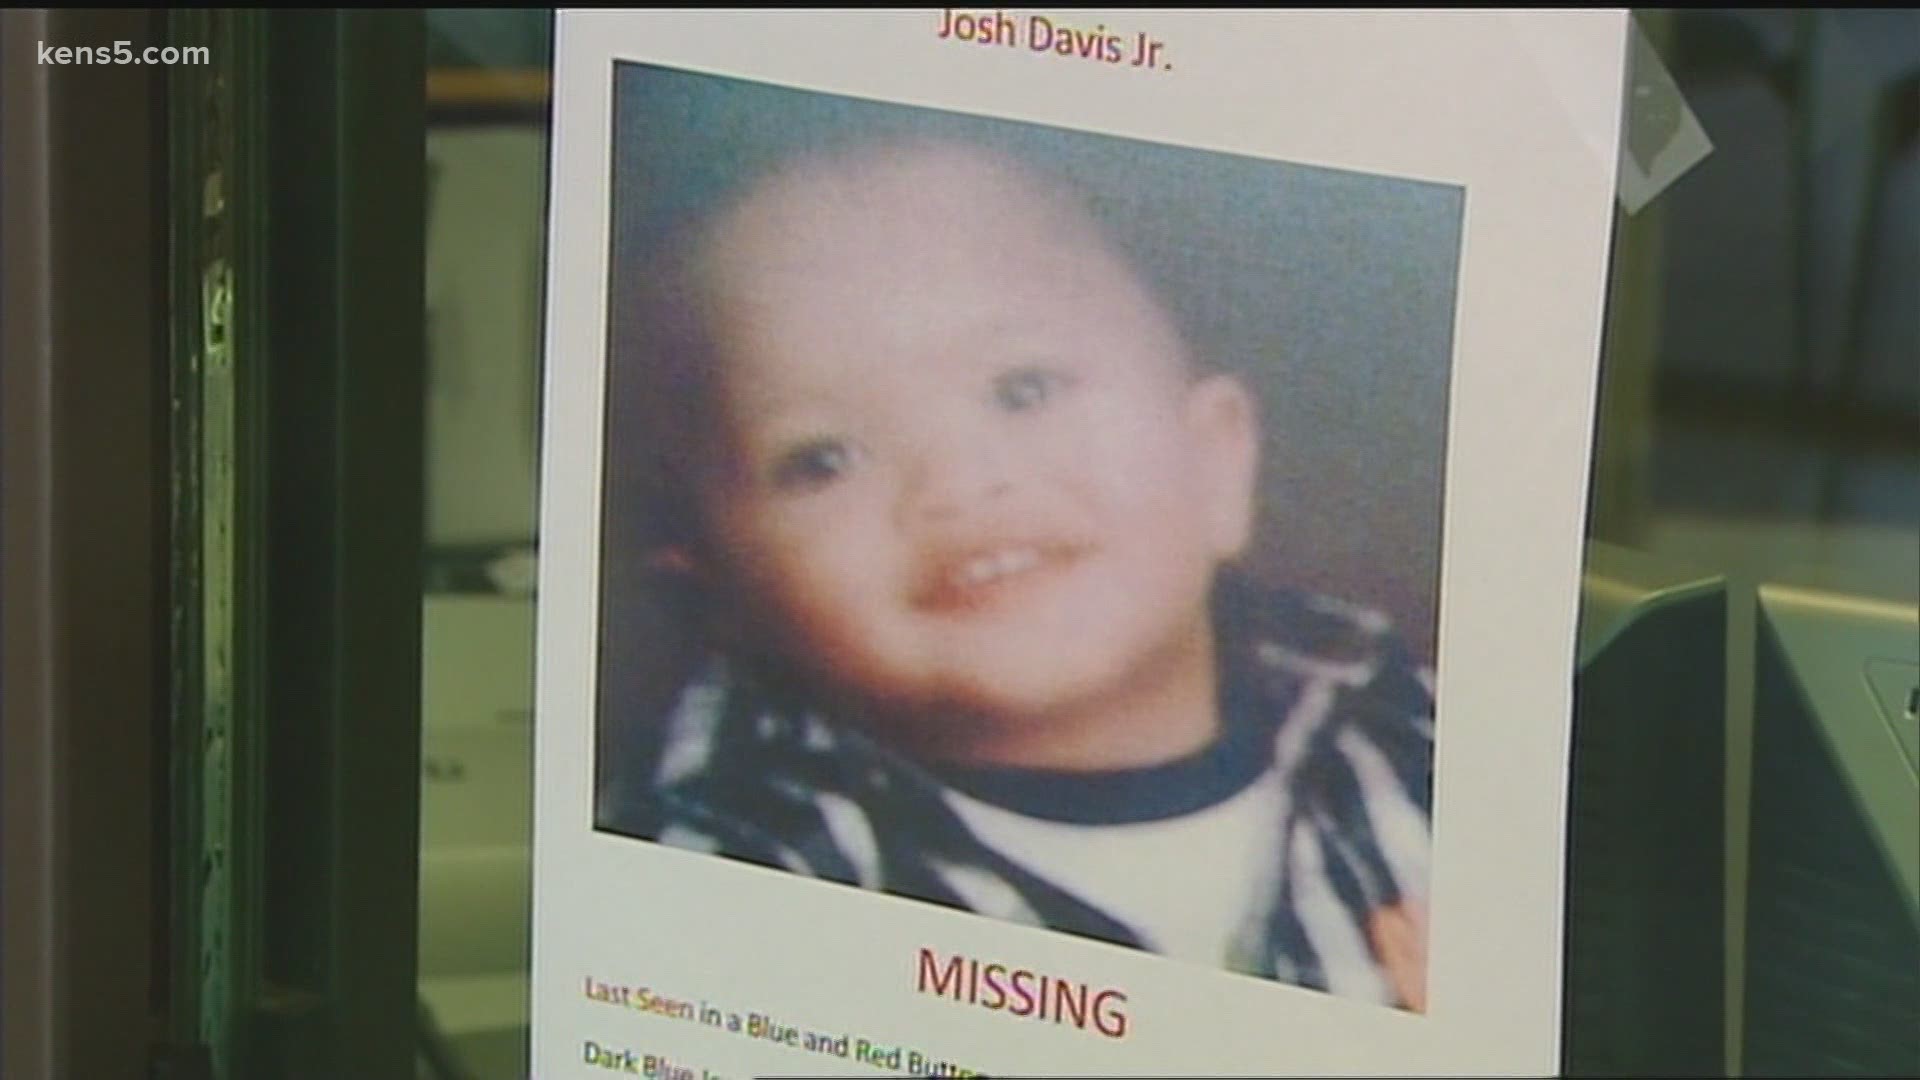 Family members reported to police on February 4, 2011, that the toddler had wandered from the home in freezing temperatures and was not seen since.